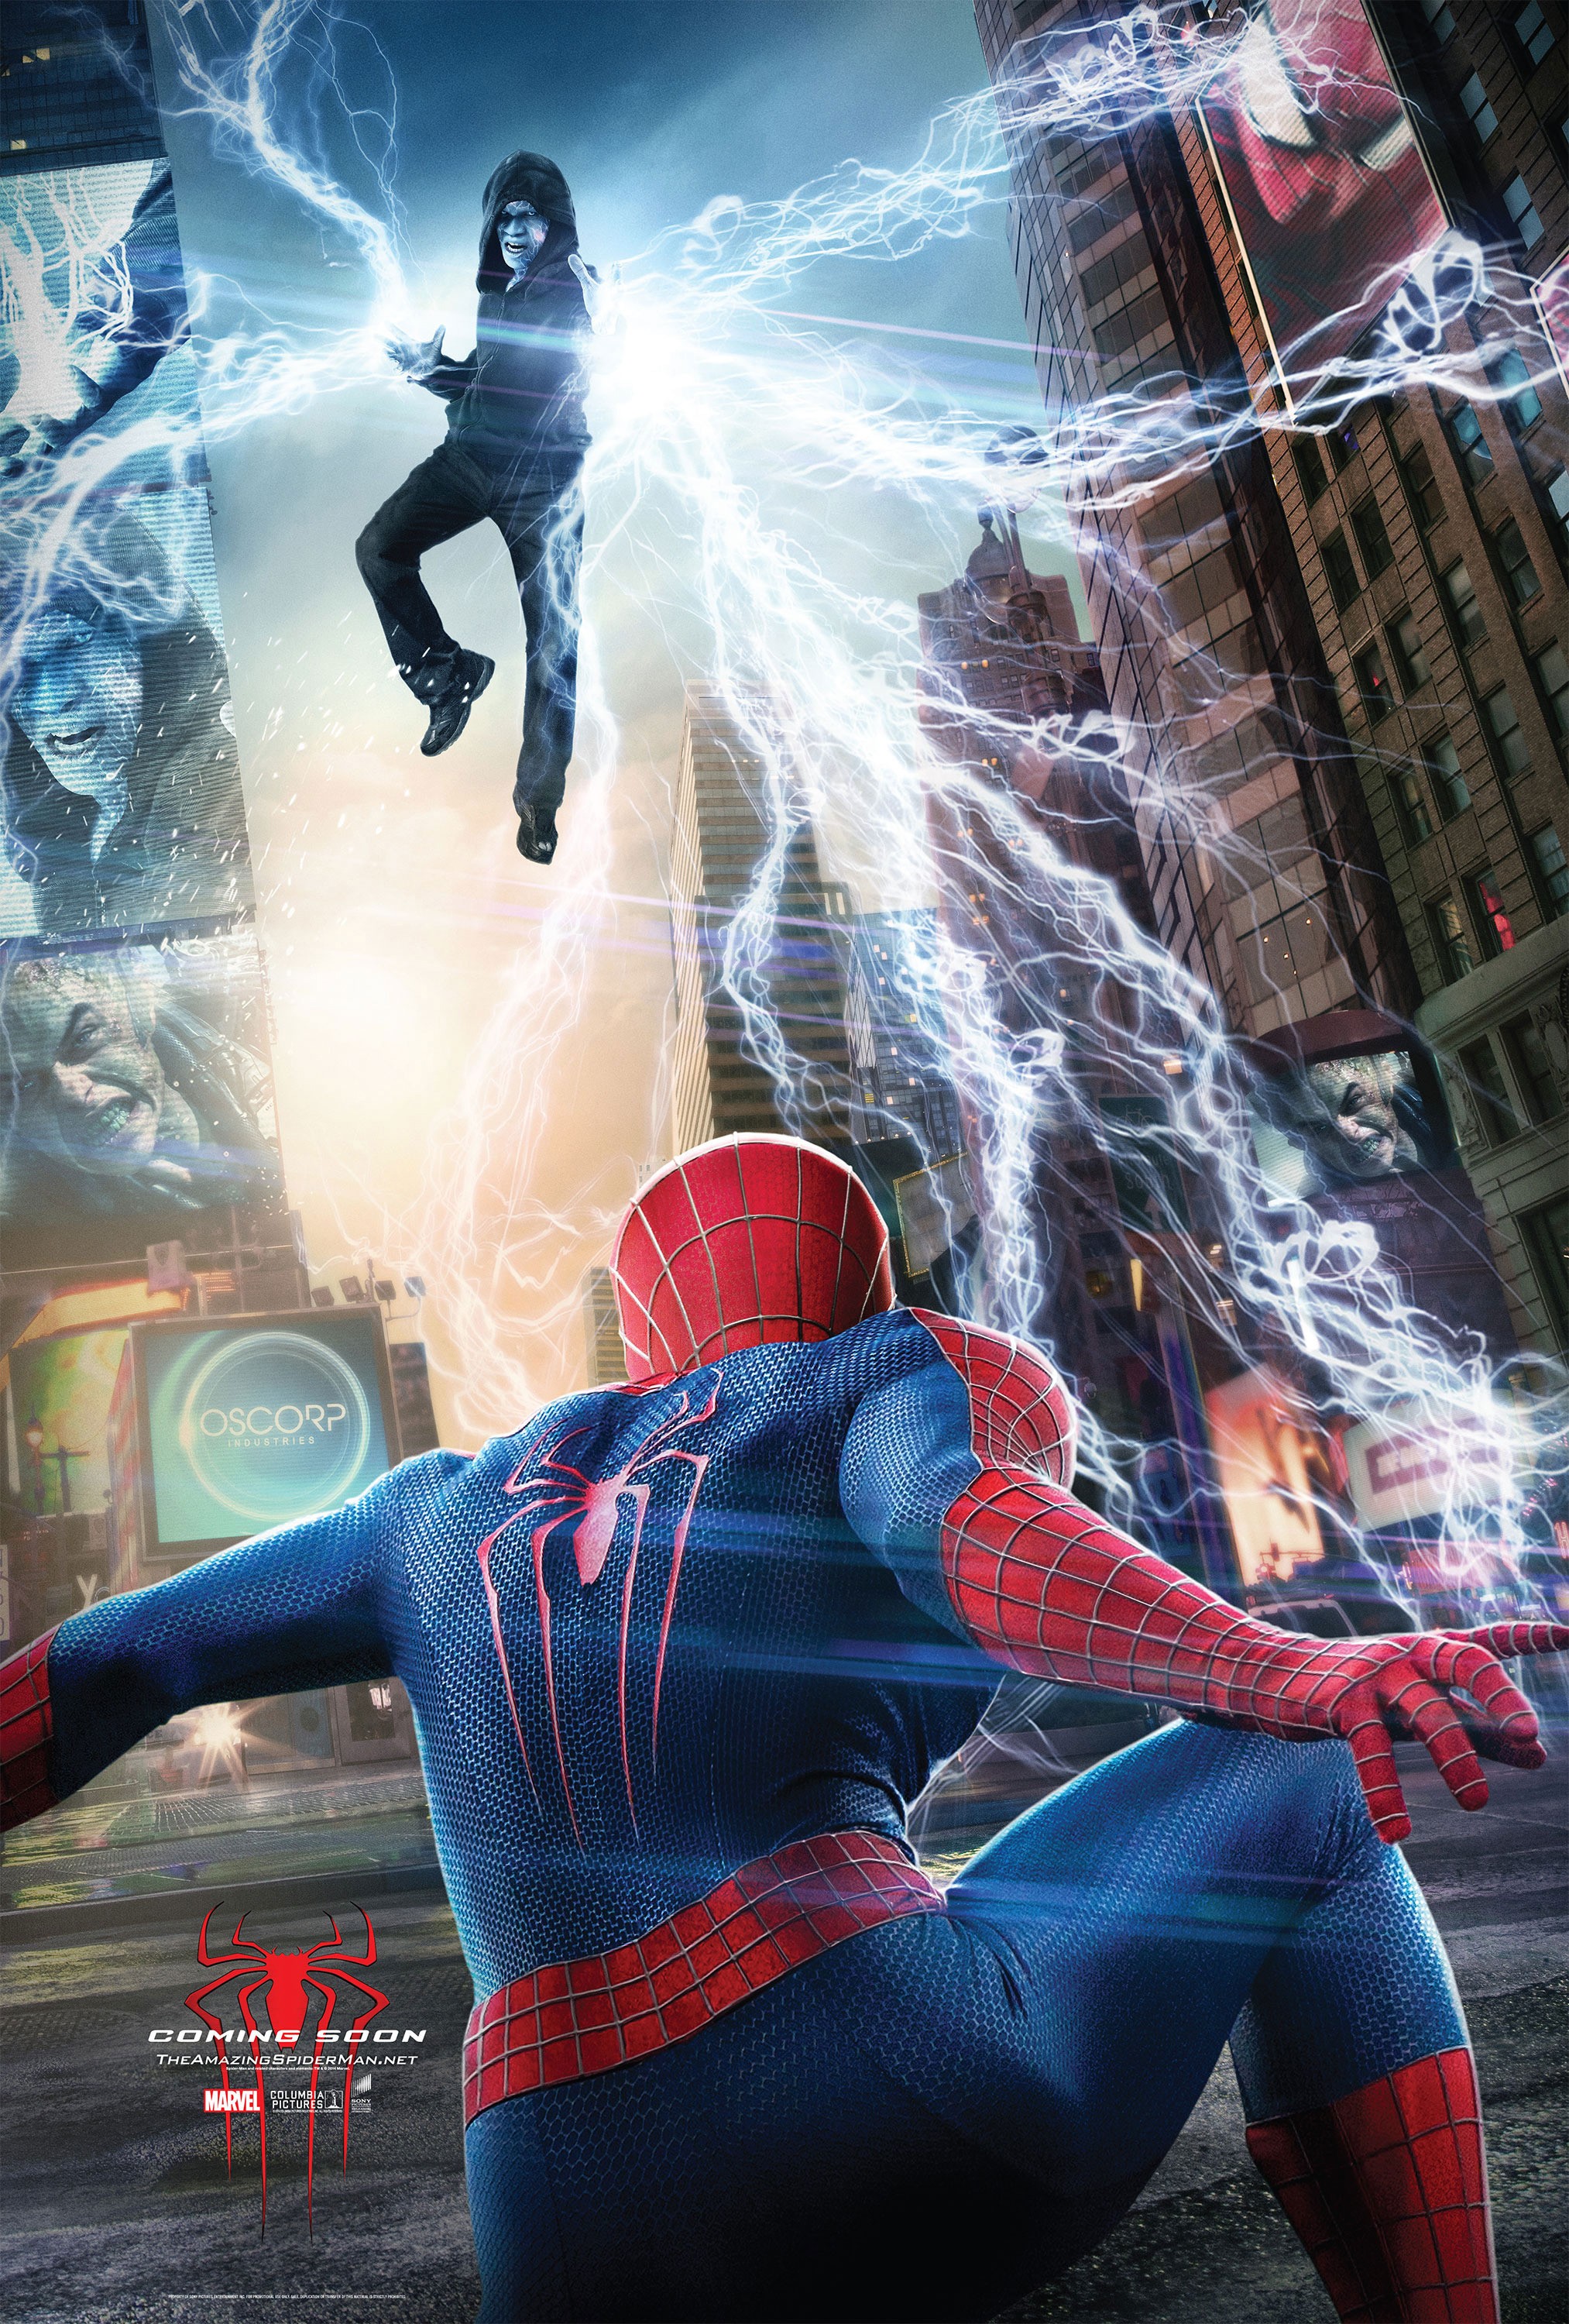 Mega Sized Movie Poster Image for The Amazing Spider-Man 2 (#7 of 17)